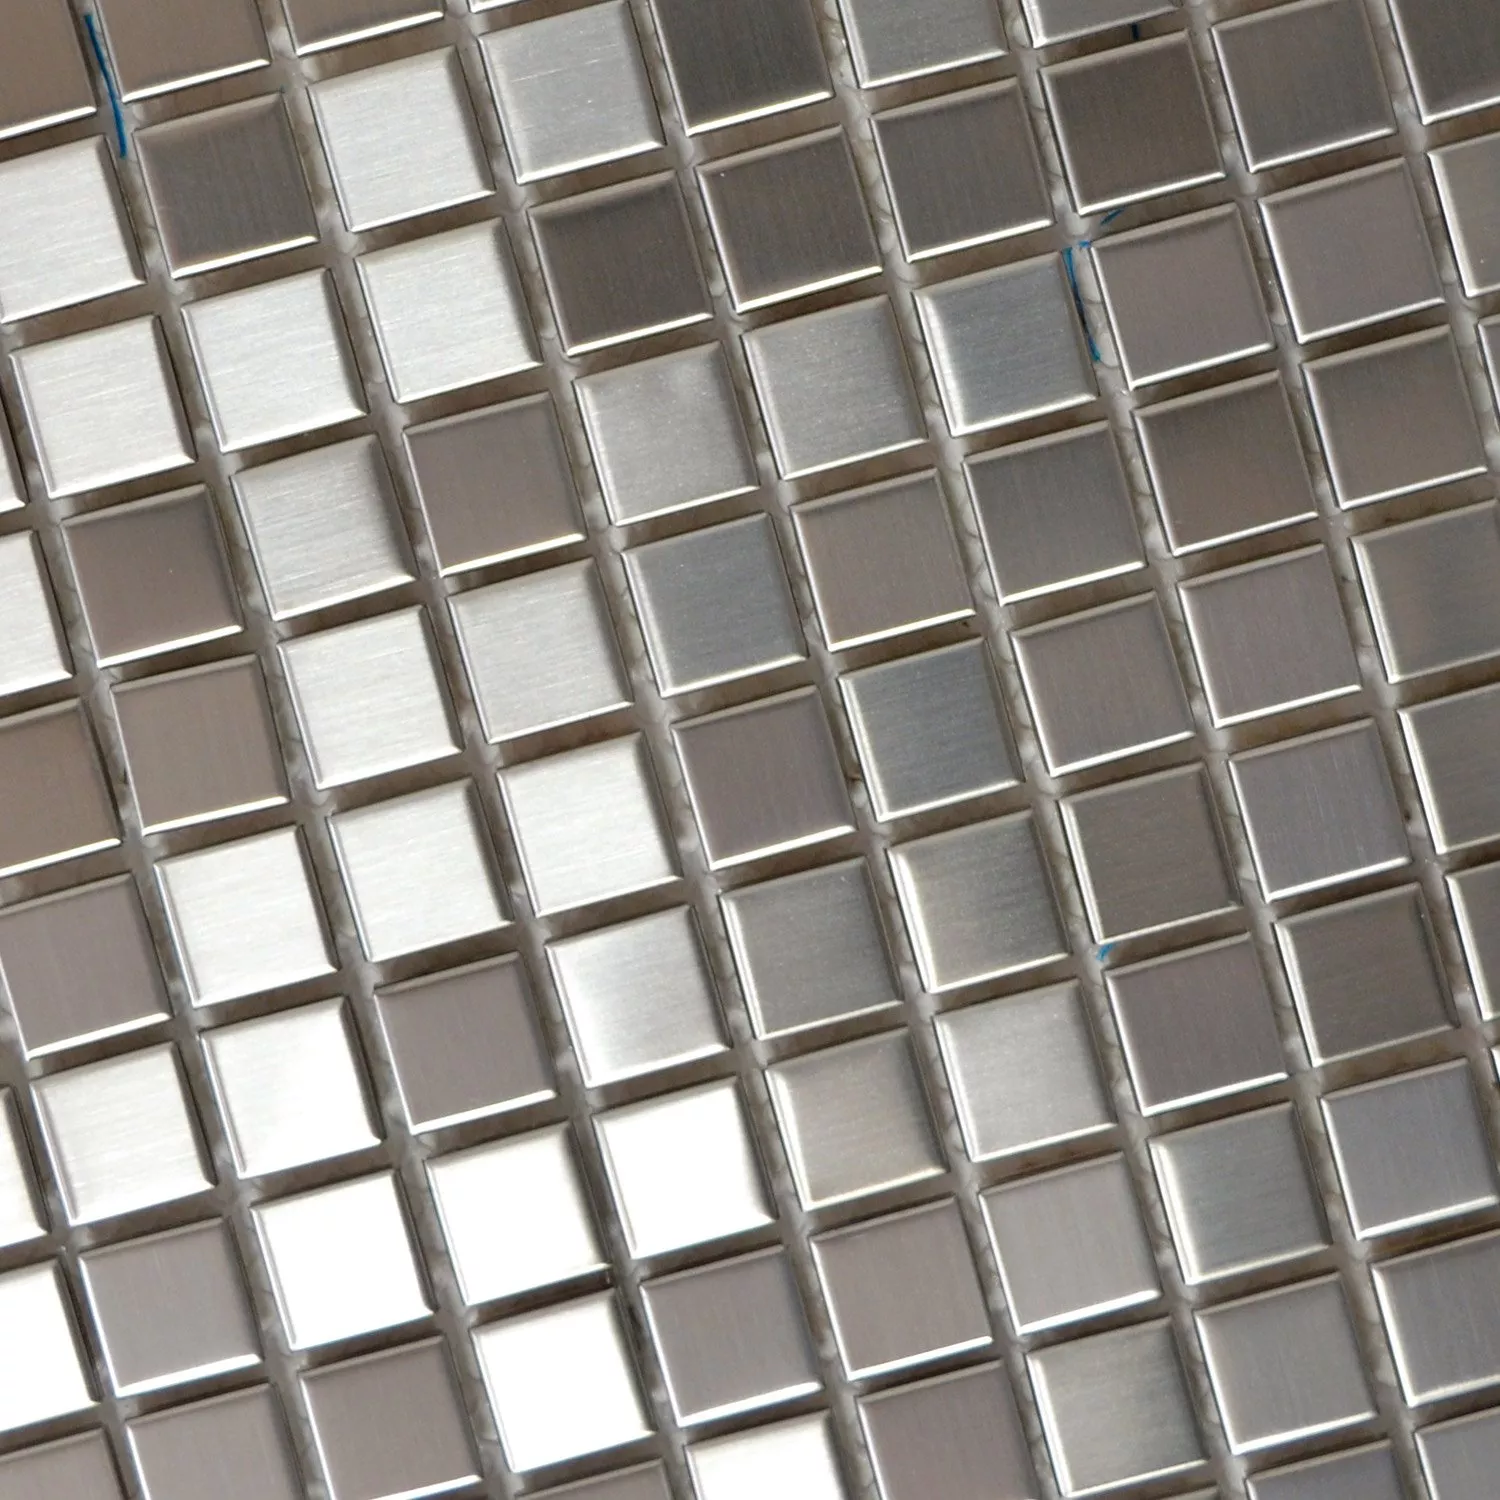 Stainless Steel Mosaic Tiles Brushed Square 15